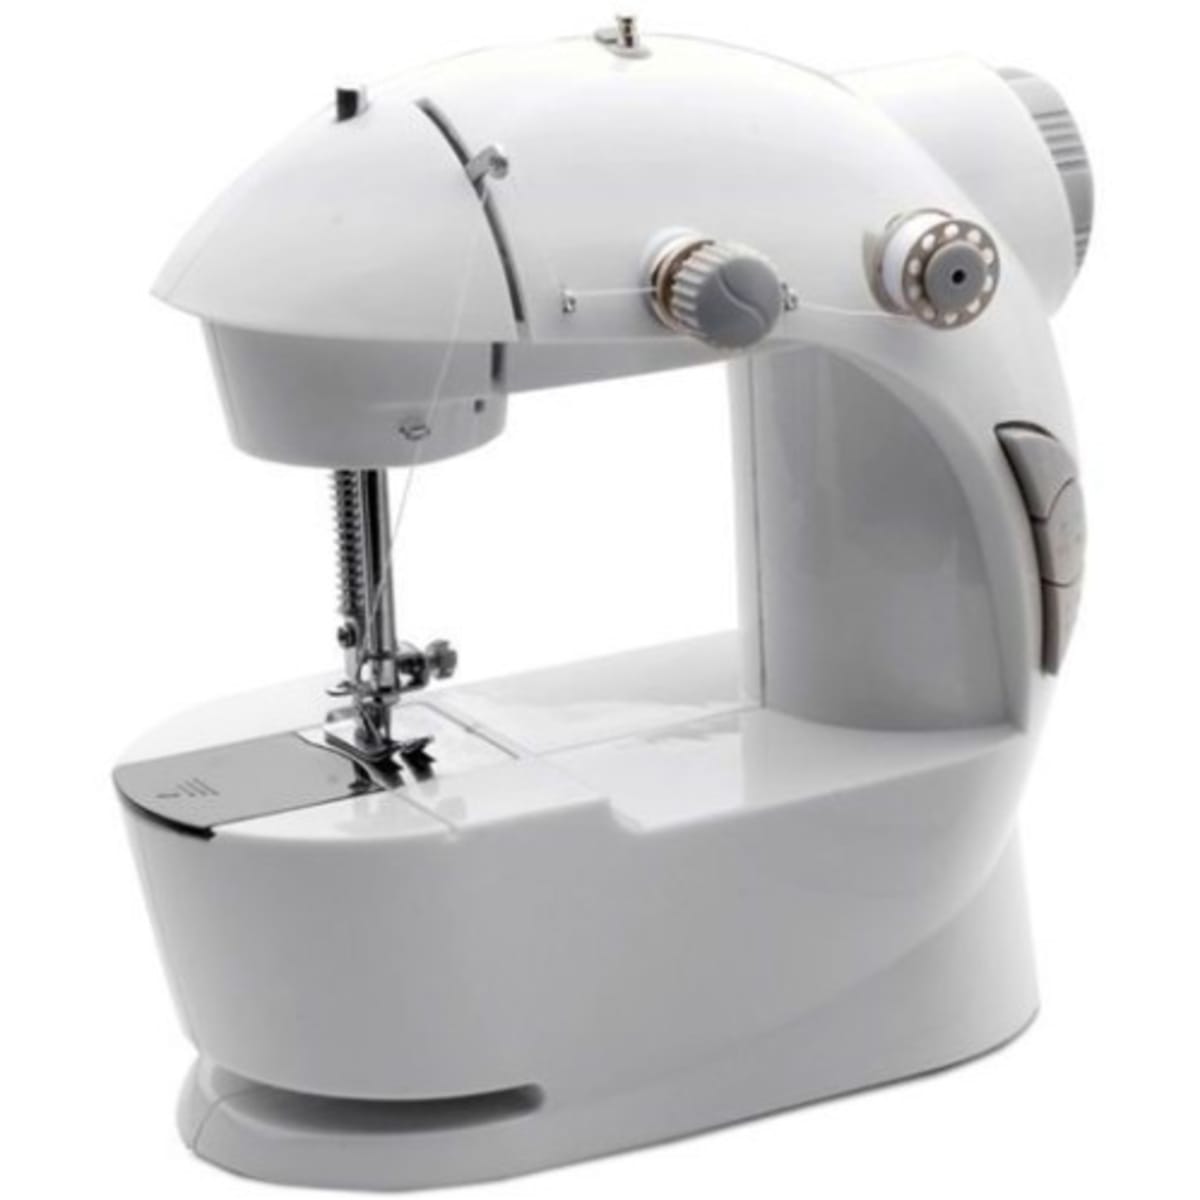 SM-201 Type 4 in 1 Multi-functional Mini Portable Sewing Machine